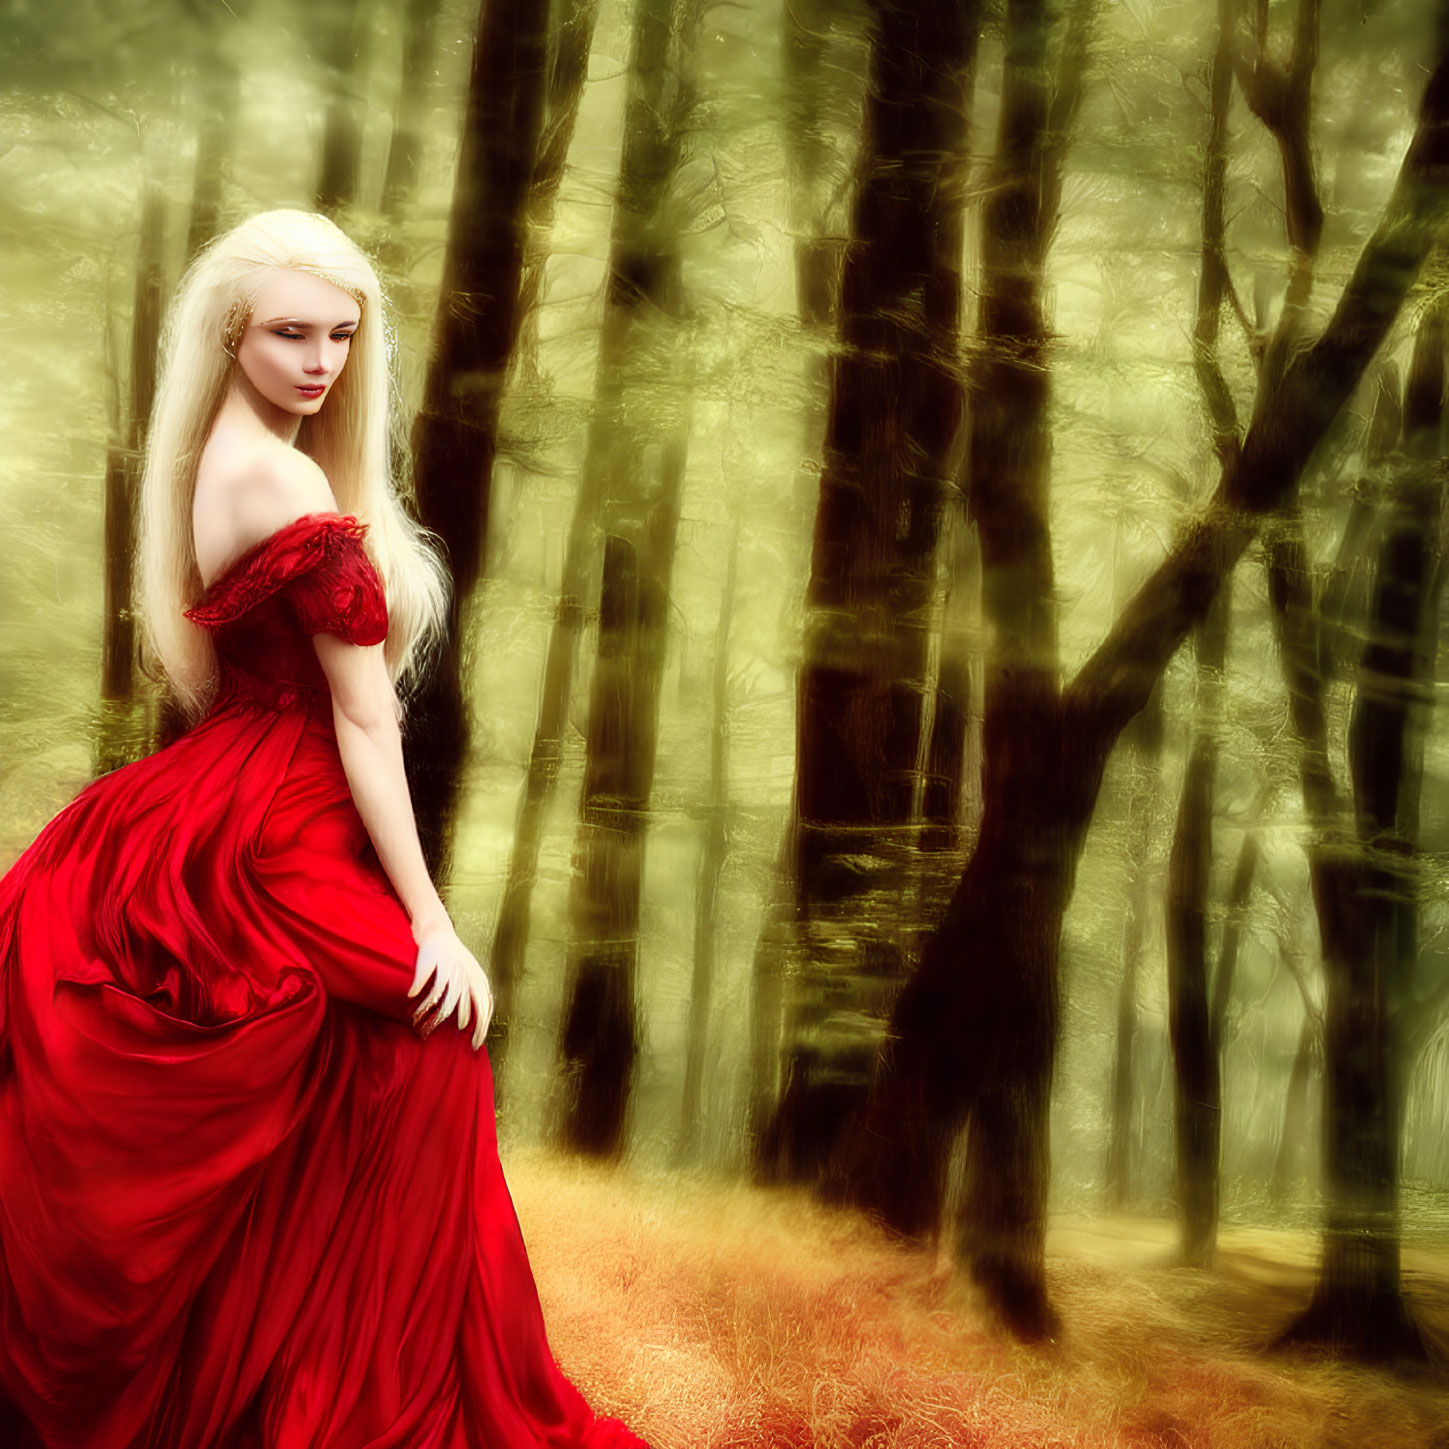 Woman in Red Gown in Misty Forest with Sunlight